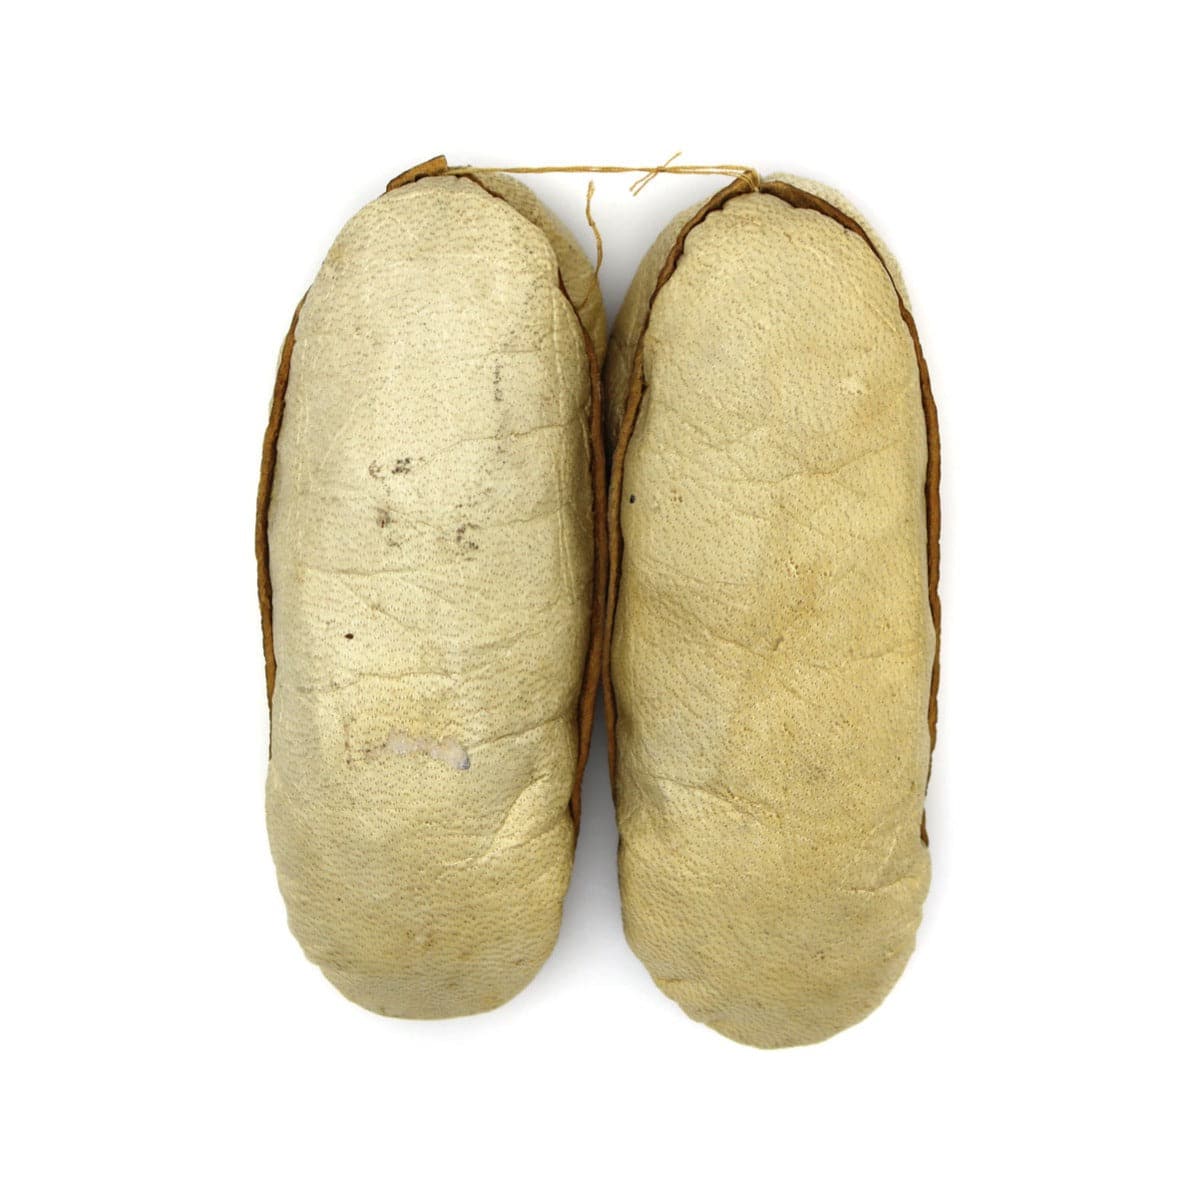 Eskimo Seal Leather and Beaded Baby Moccasins c. 1900s, 2" x 5" x 2" (DW92323A-0421-007) 5
